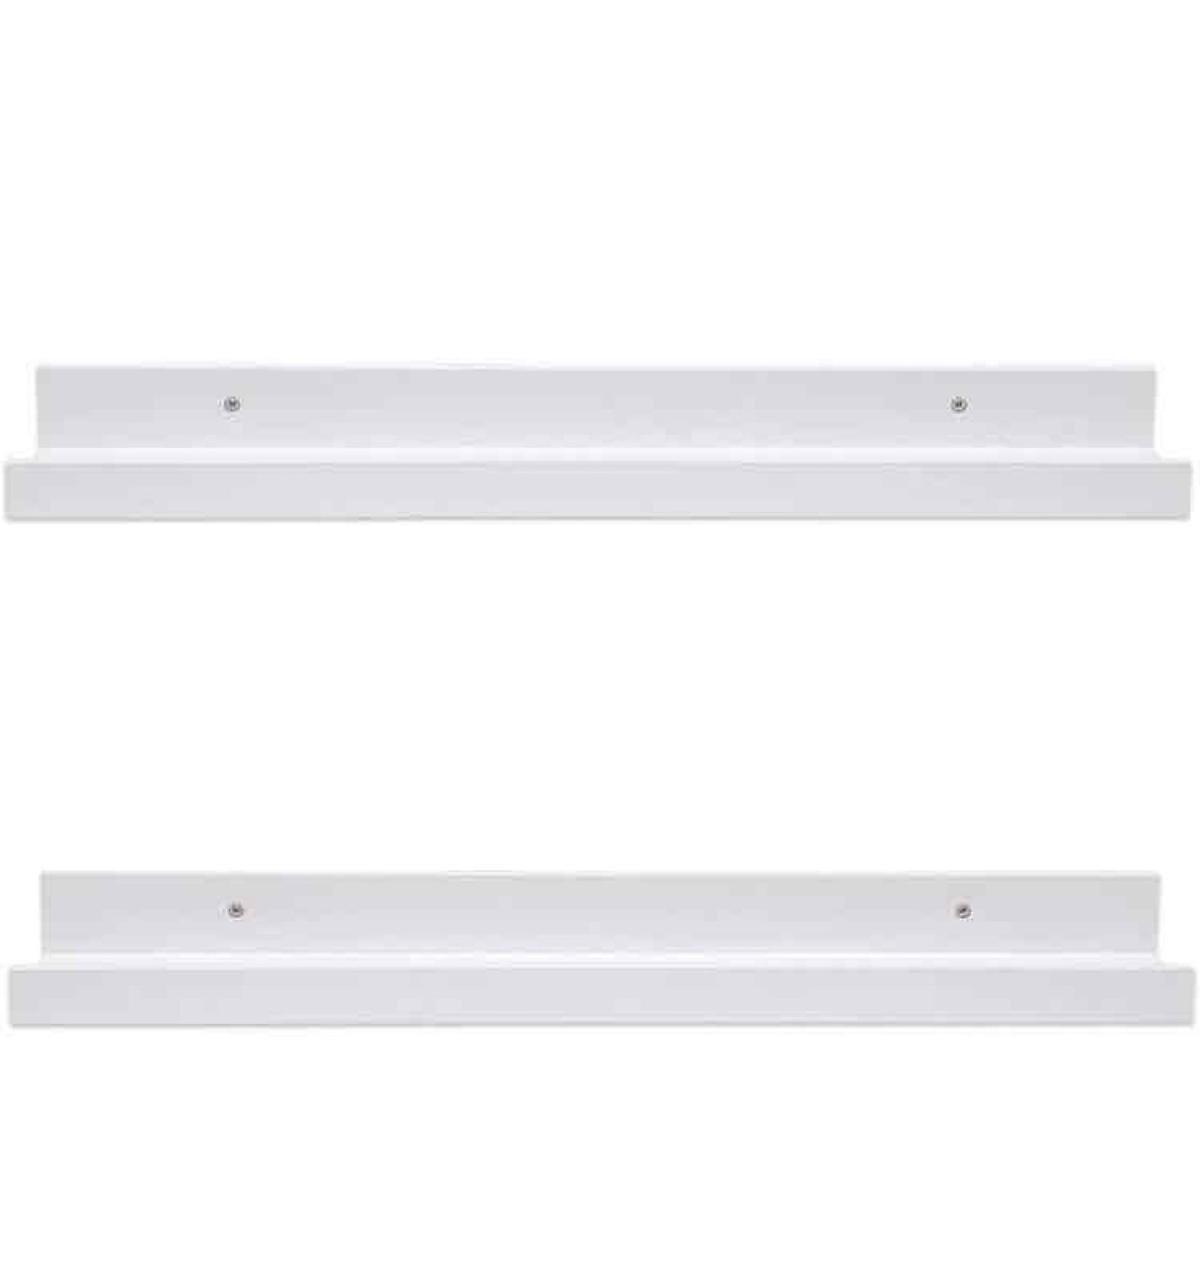 AZSKY White Floating Shelves Wall Mounted Set of 2, 24 Inch Picture Ledge Shelf (Solid Pine Wood)